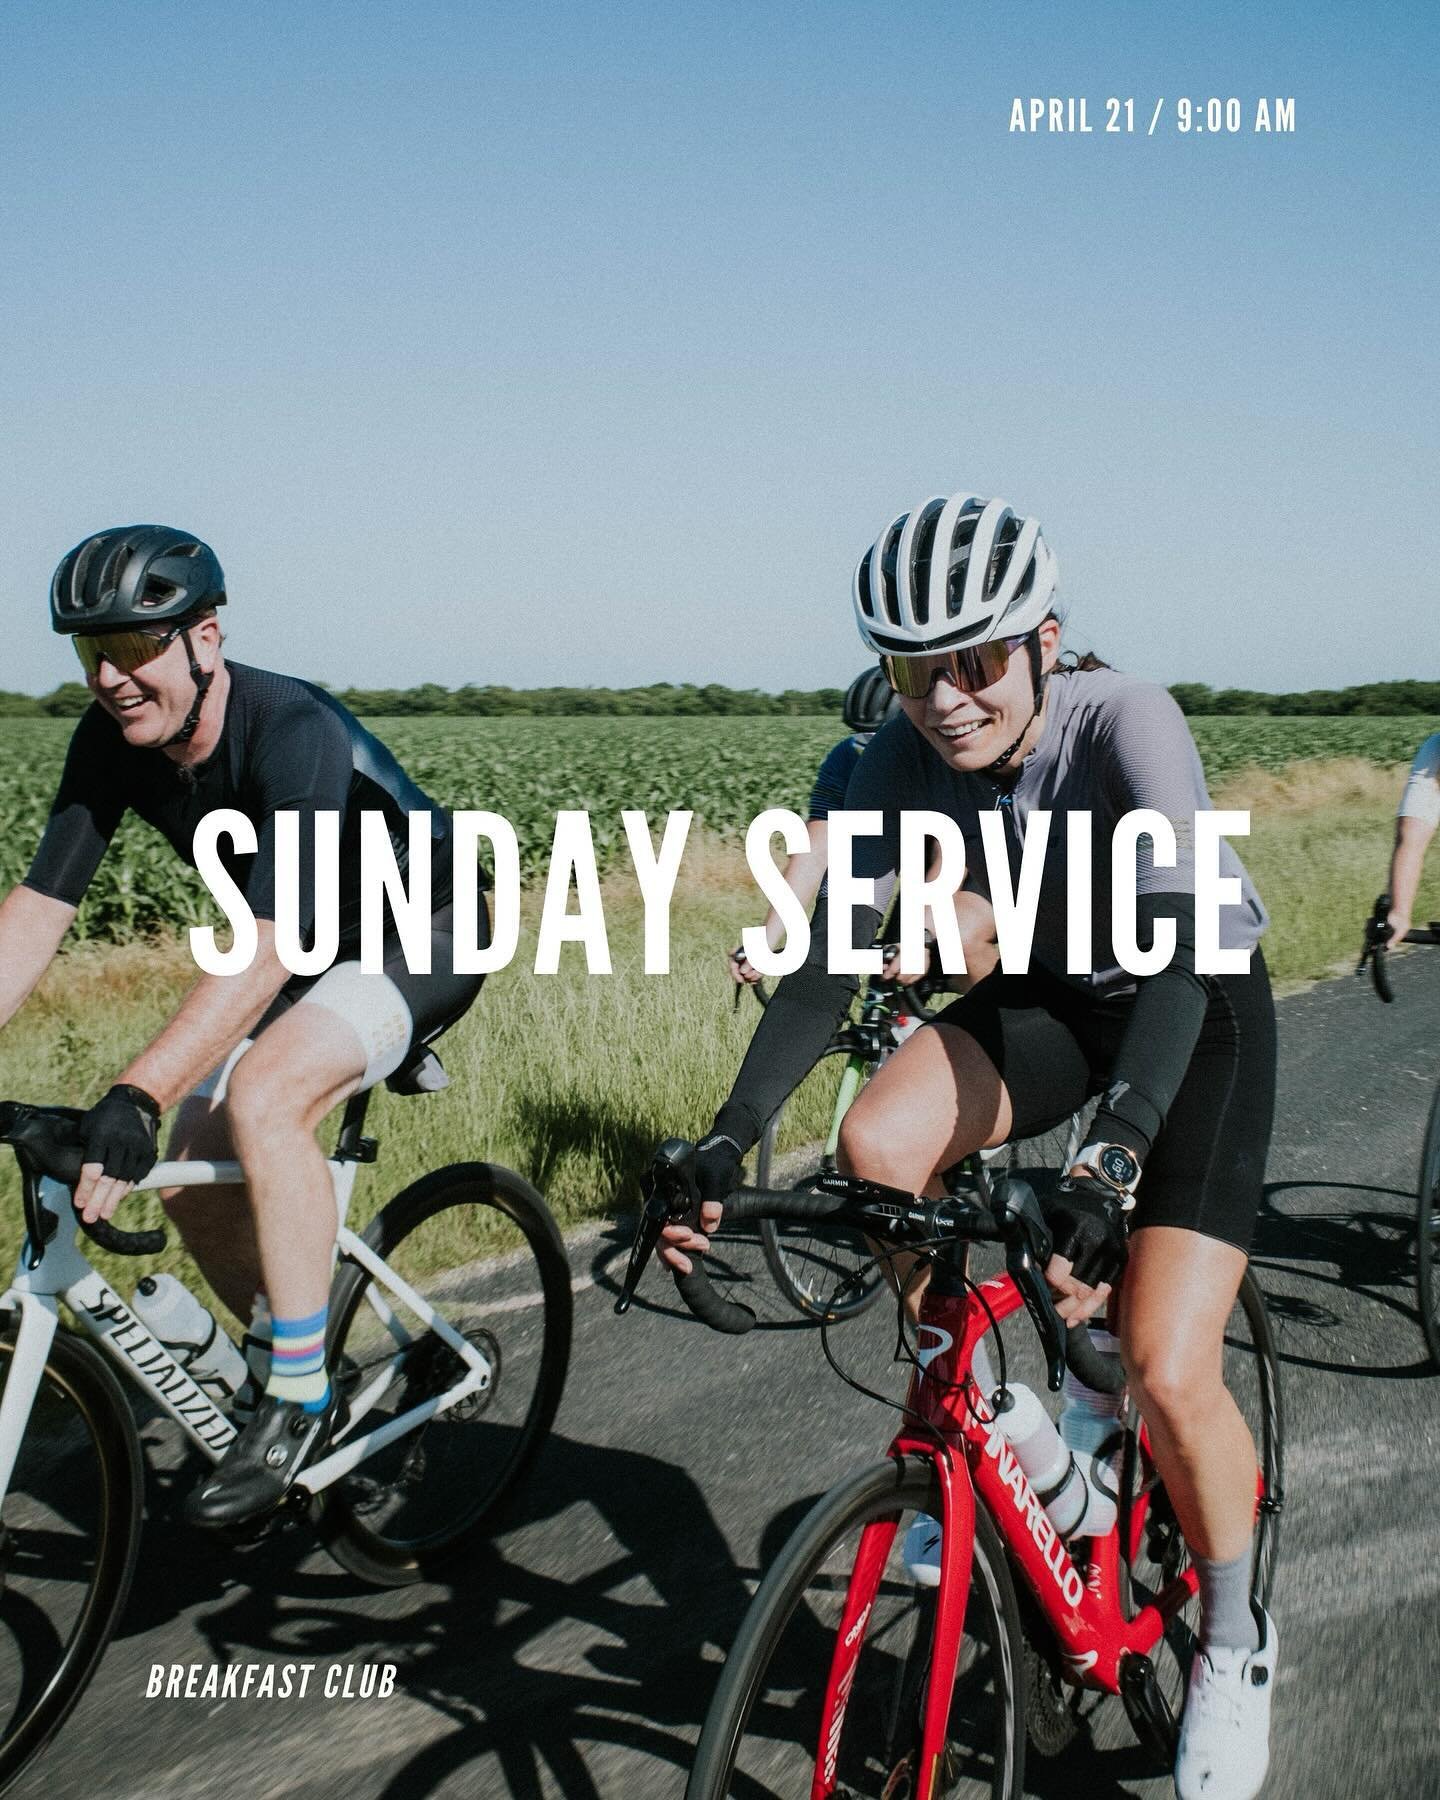 TOMORROW / 9:00 AM: @central.machine.works. SUNDAY SERVICE is in session ⛪️

We&rsquo;re goin&rsquo; to church&hellip; NEW SWEDEN church that is. Meet us for a later roll in nicer weather on a day we don&rsquo;t usually gather. Wind from the north wi